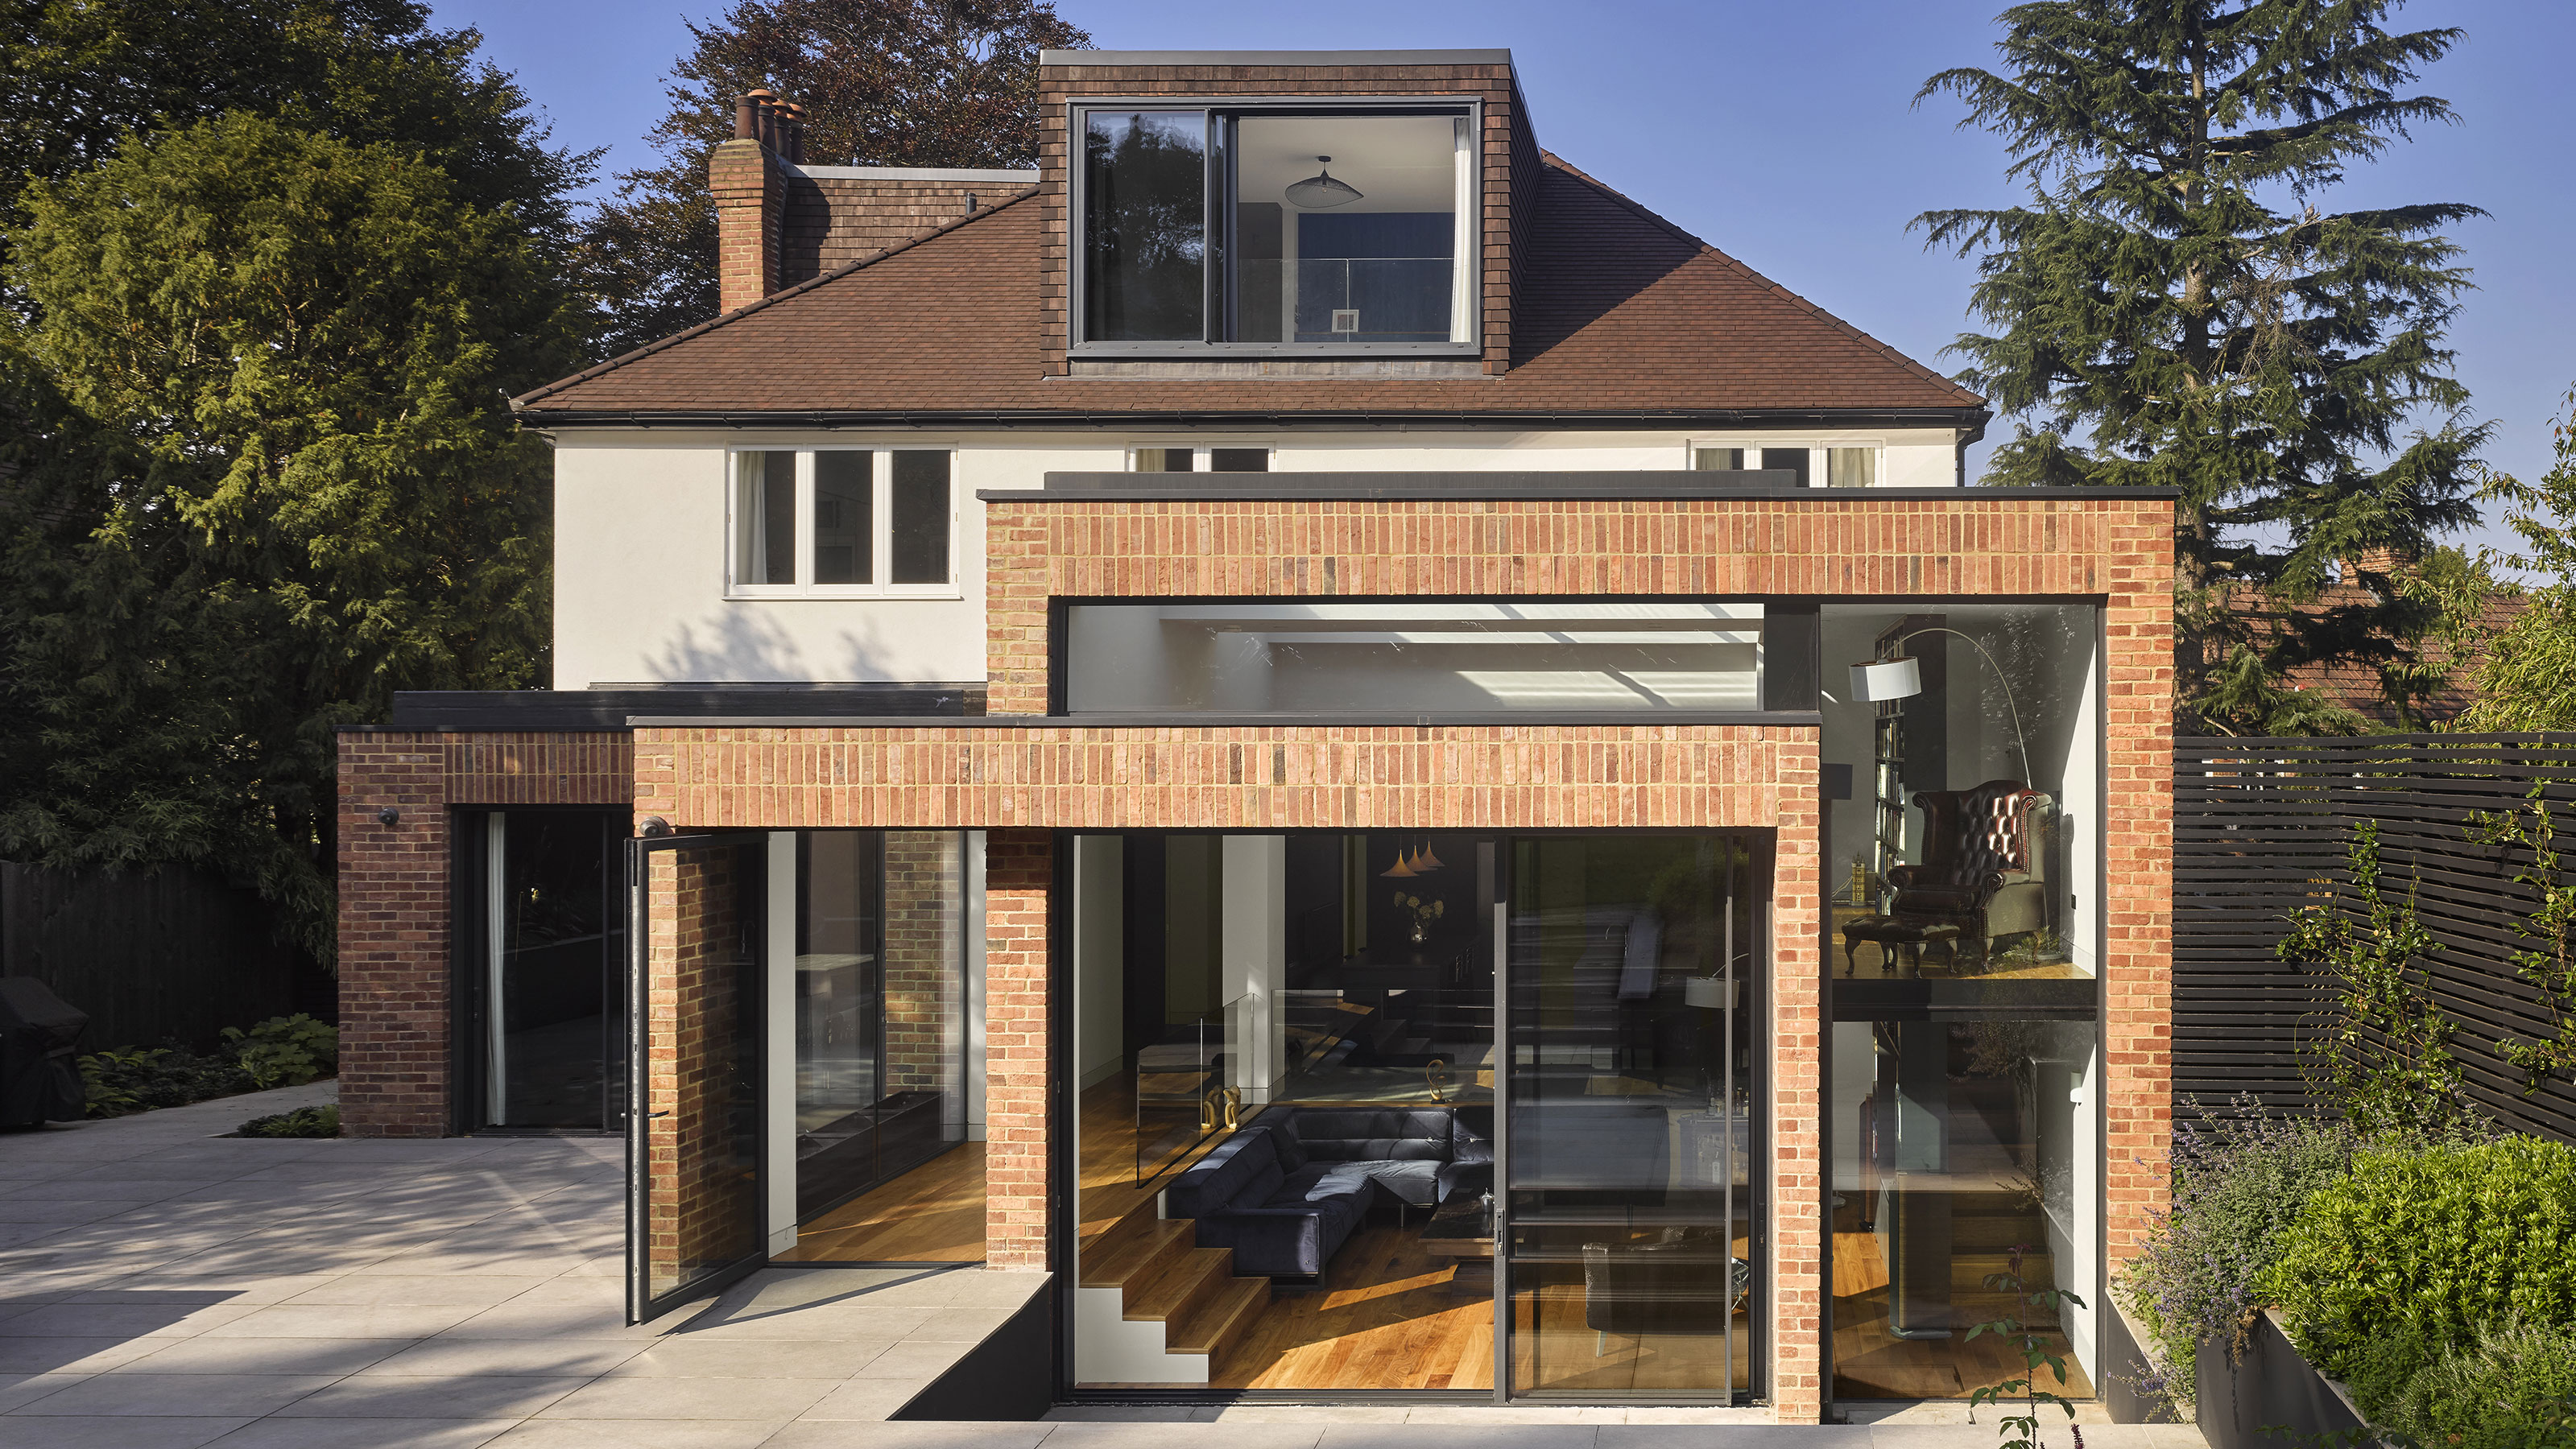 “Redefining Boundaries Innovative Roof Extensions”